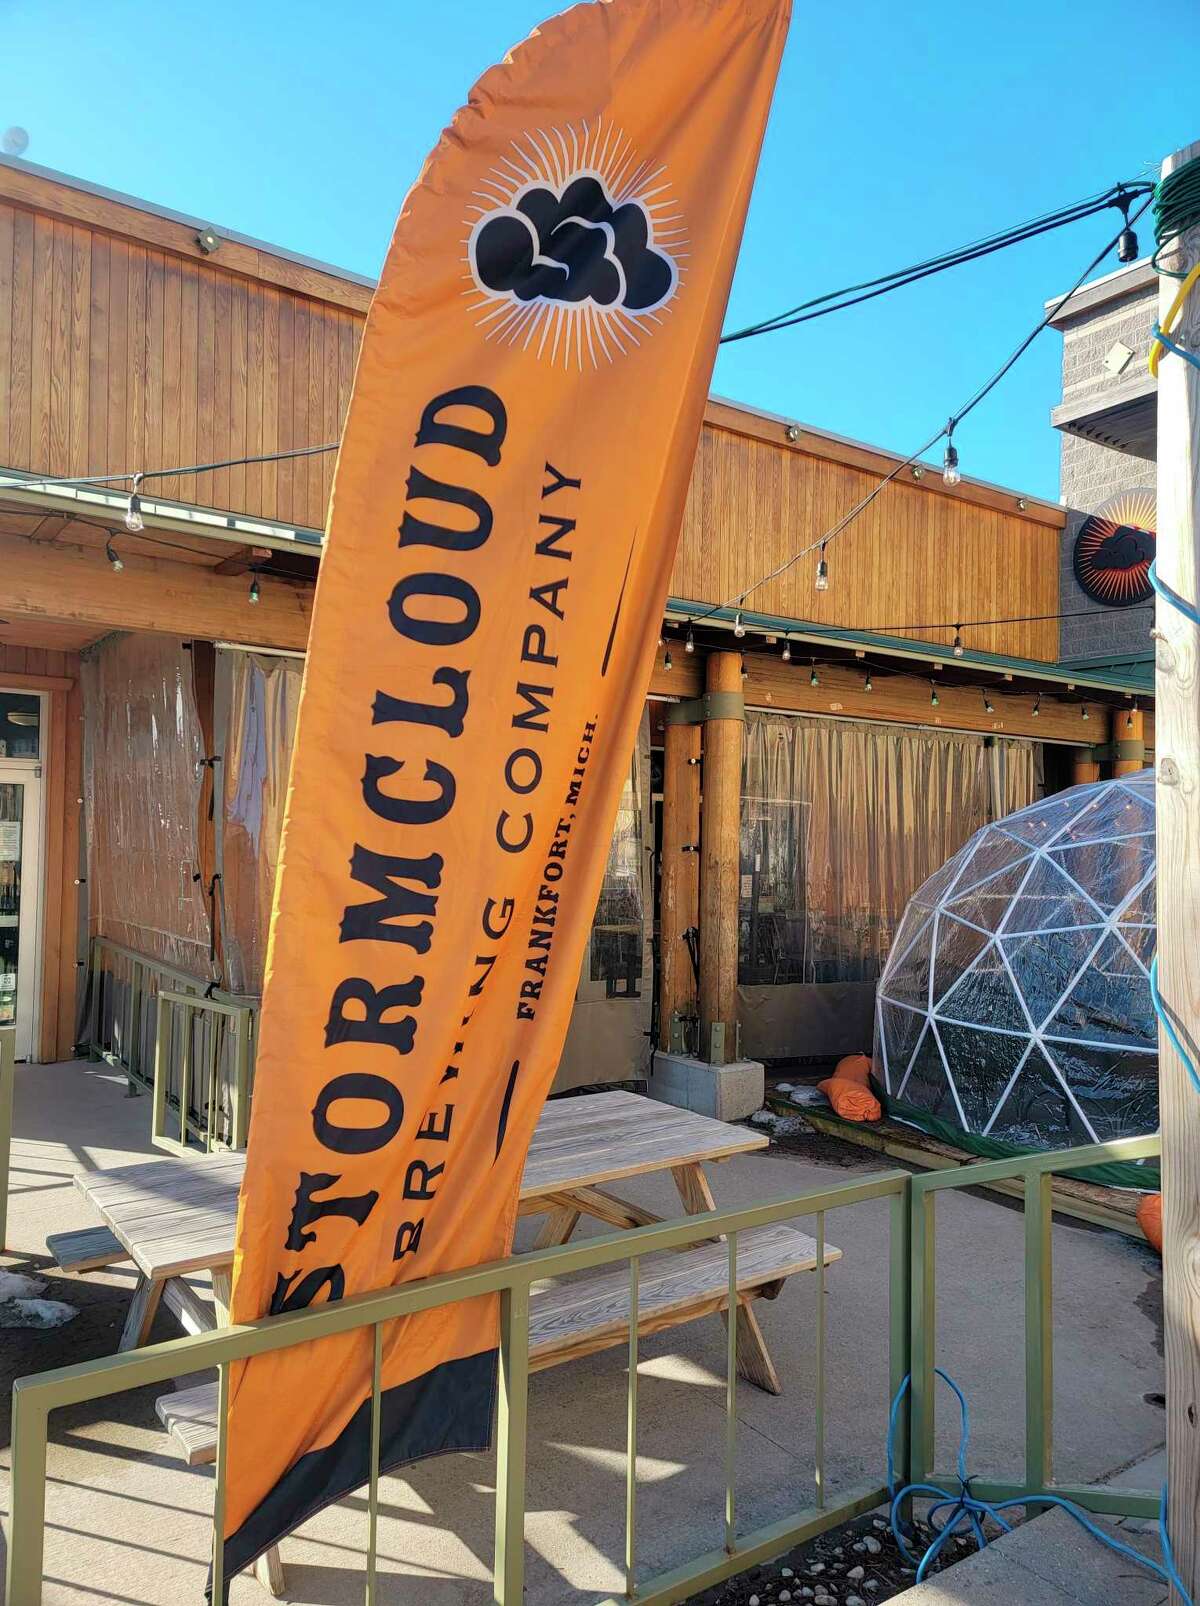 Stormcloud Brewery was able to hold on during the 2020 closures and Michigan Department of Health and Human Services orders by improving its take out system, but still lost business like many area restaurants. (Colin Merry/Record Patriot)